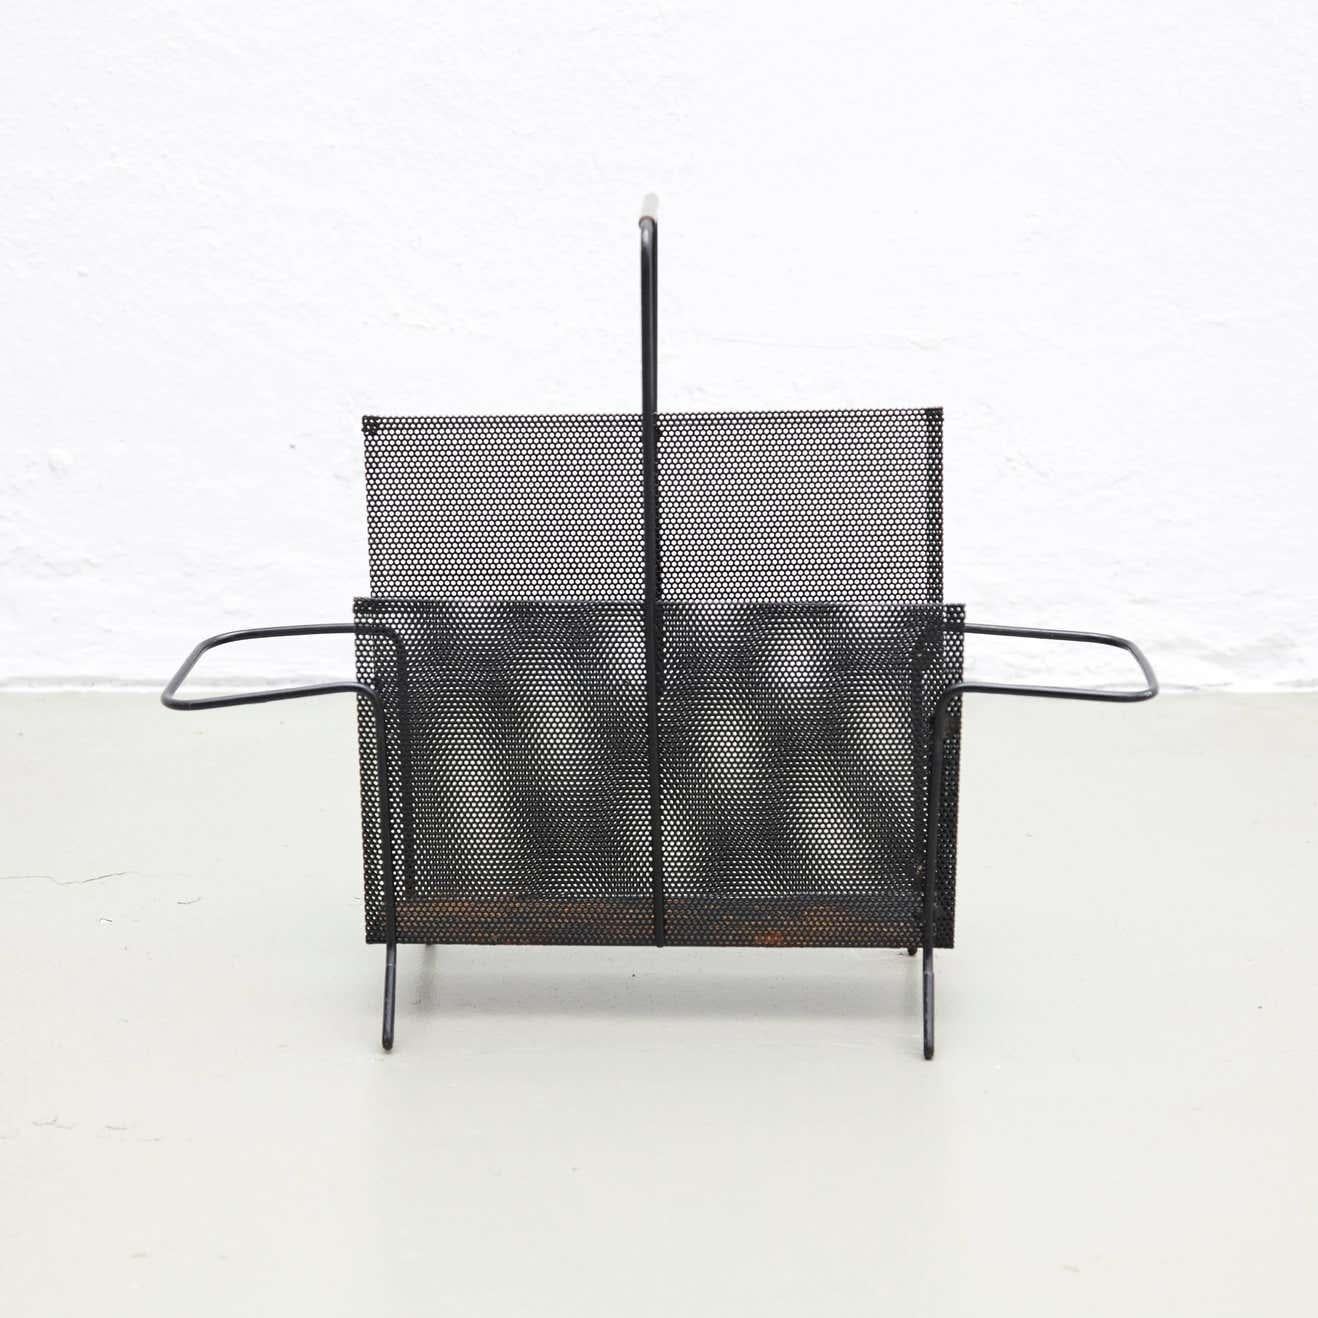 Magazine holder, designed by Mathieu Matégot.
Manufactured by ateliers Matégot (France), circa 1950.
Folded, perforated metal.

In good original condition, with minor wear consistent with age and use, preserving a beautiful patina. With some